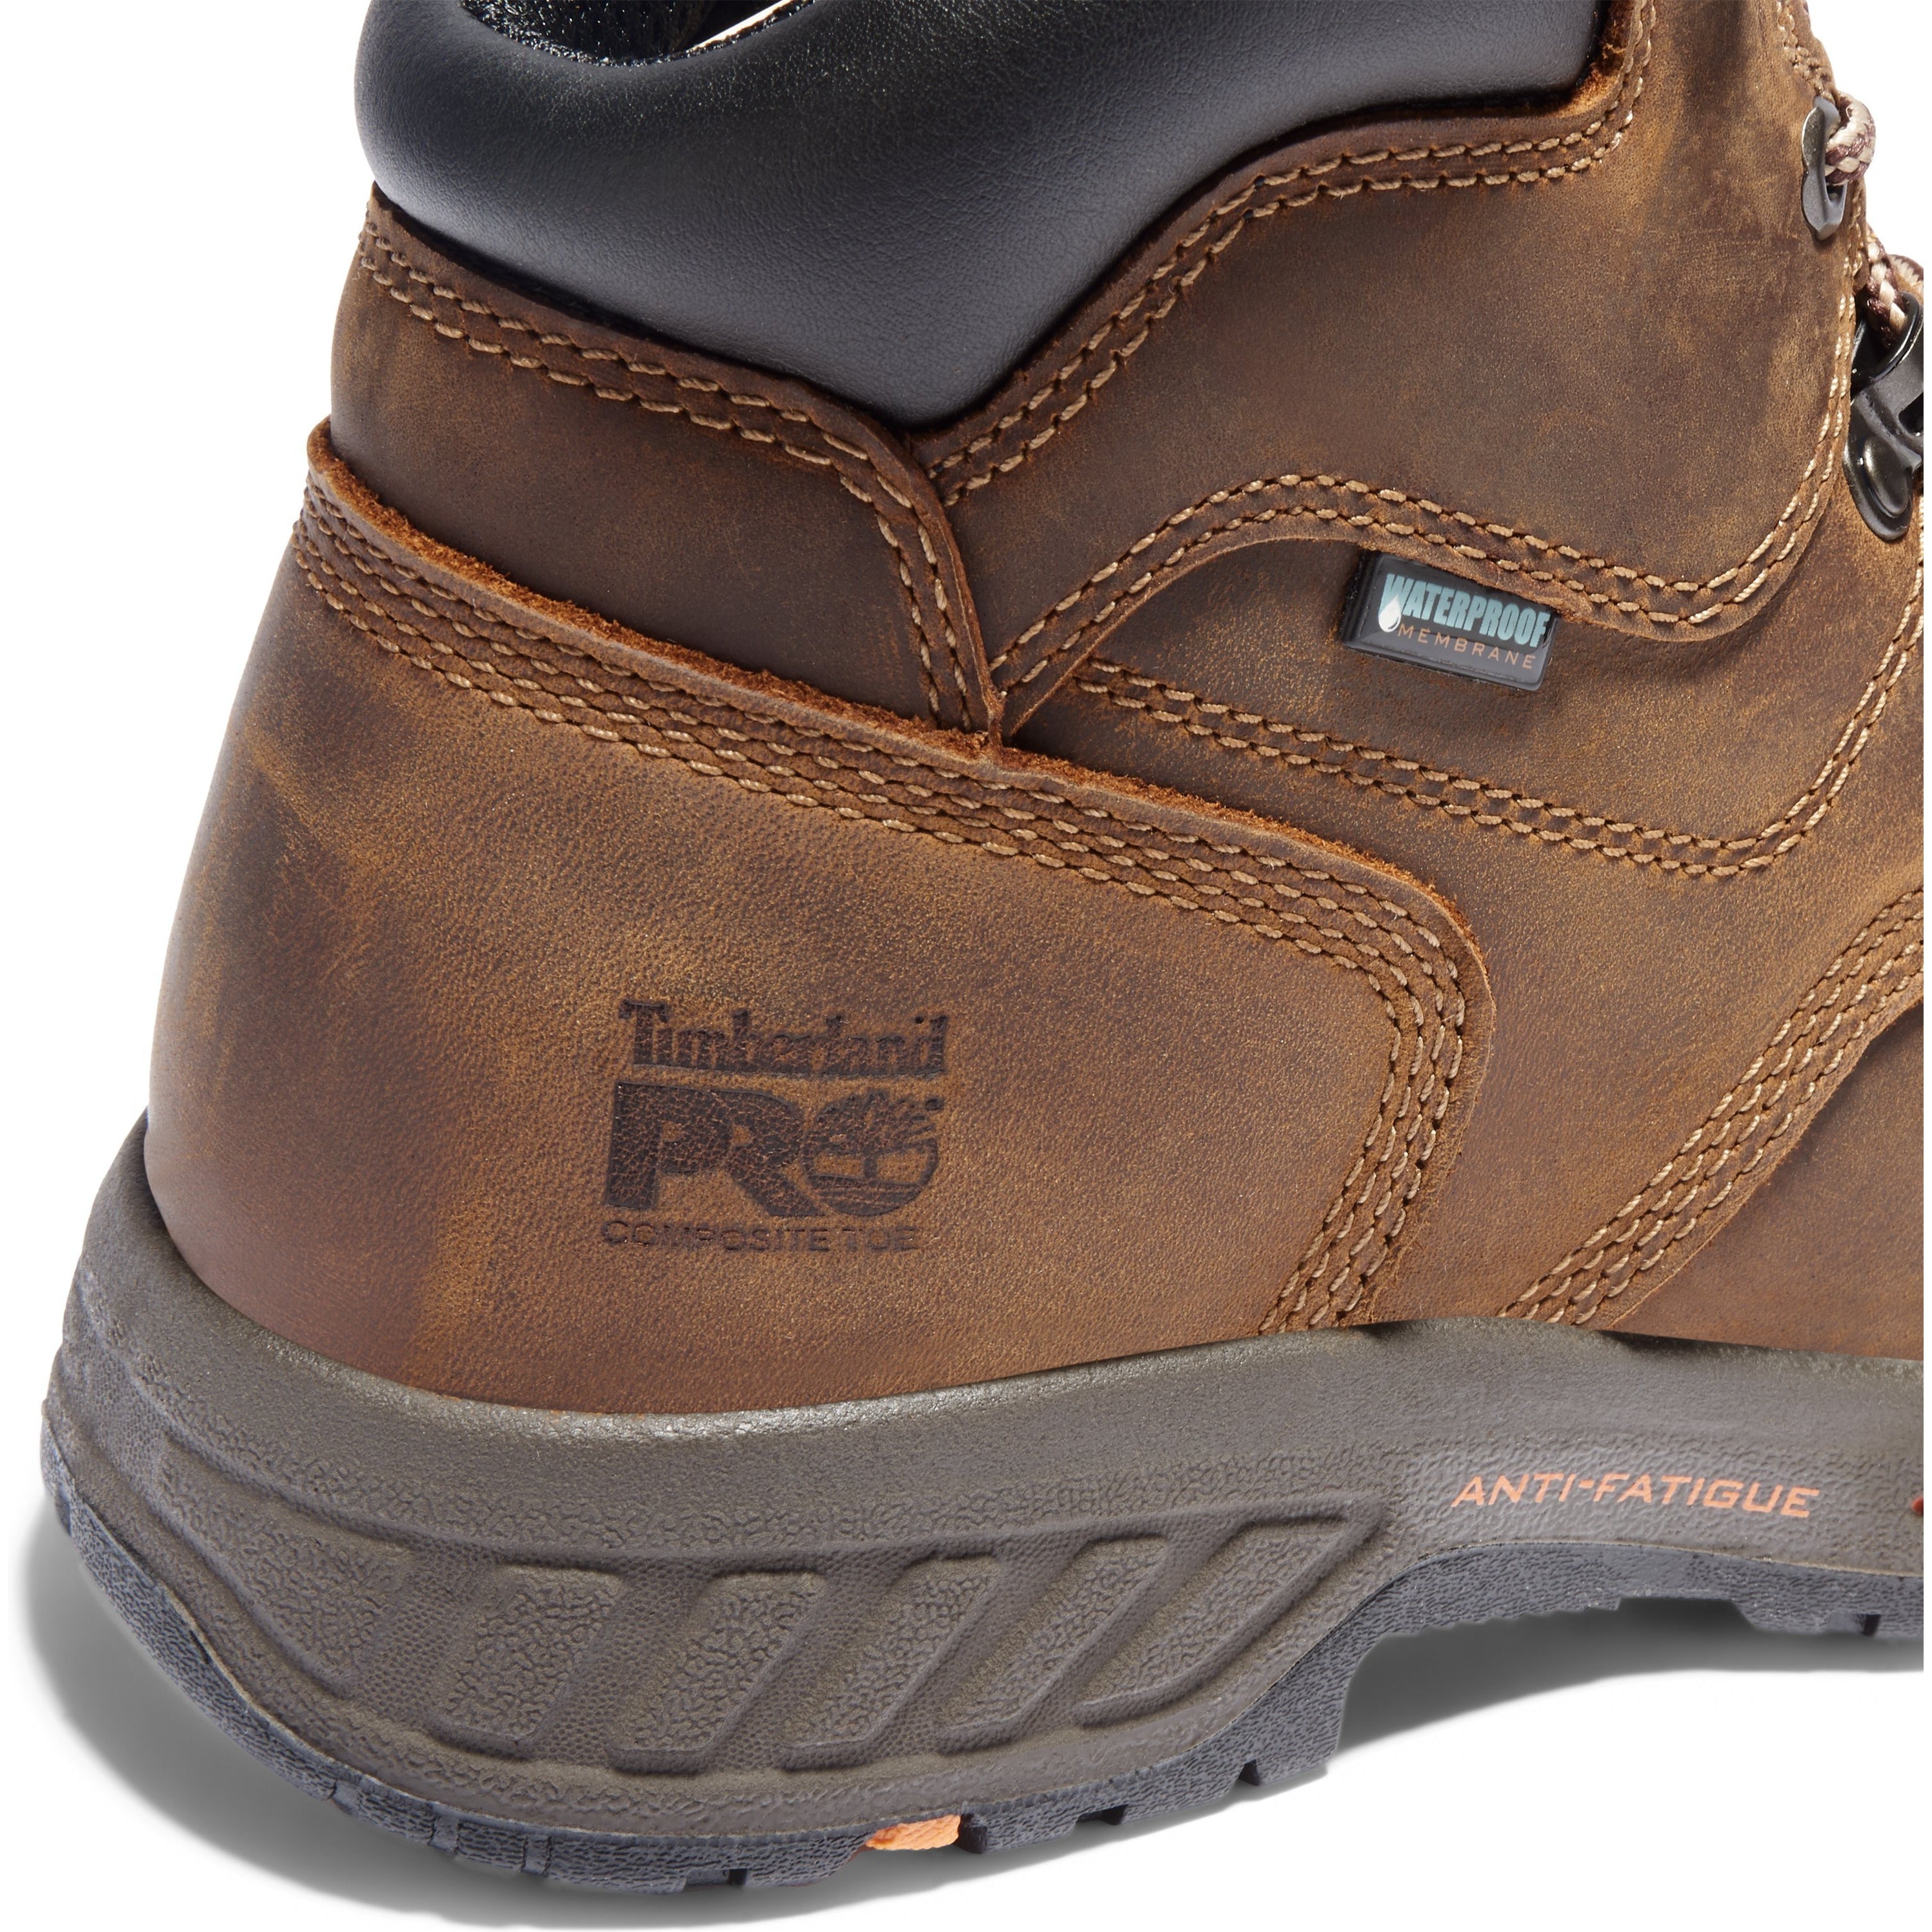 Timberland PRO Men's Helix 6" HD Comp Toe WP Work Boot - TB0A1HQL214  - Overlook Boots